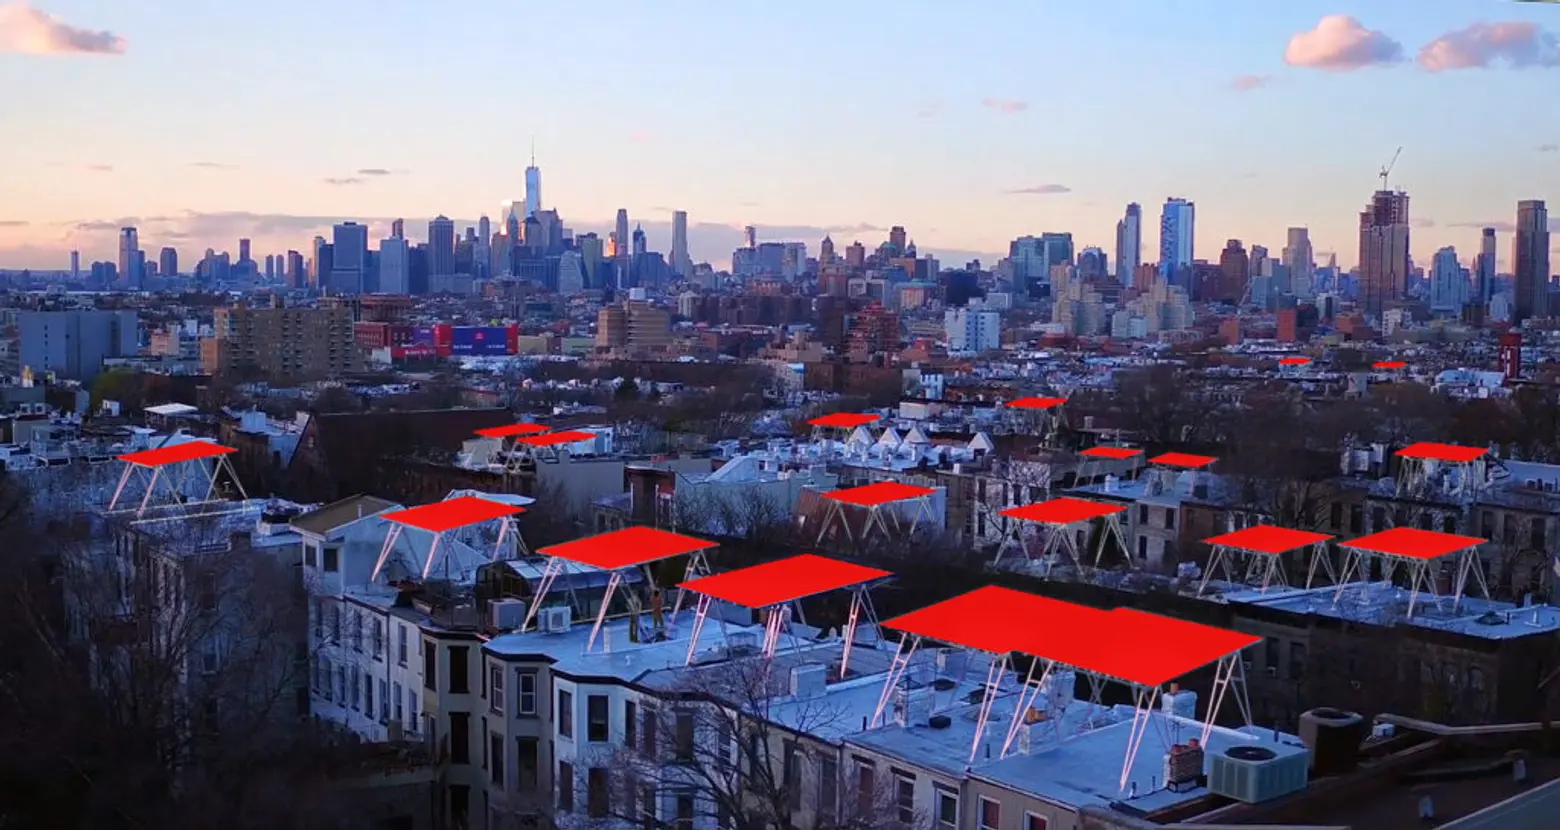 New ‘Solar Canopy’ Can Be Installed Atop Any NYC Building to Provide Solar Power